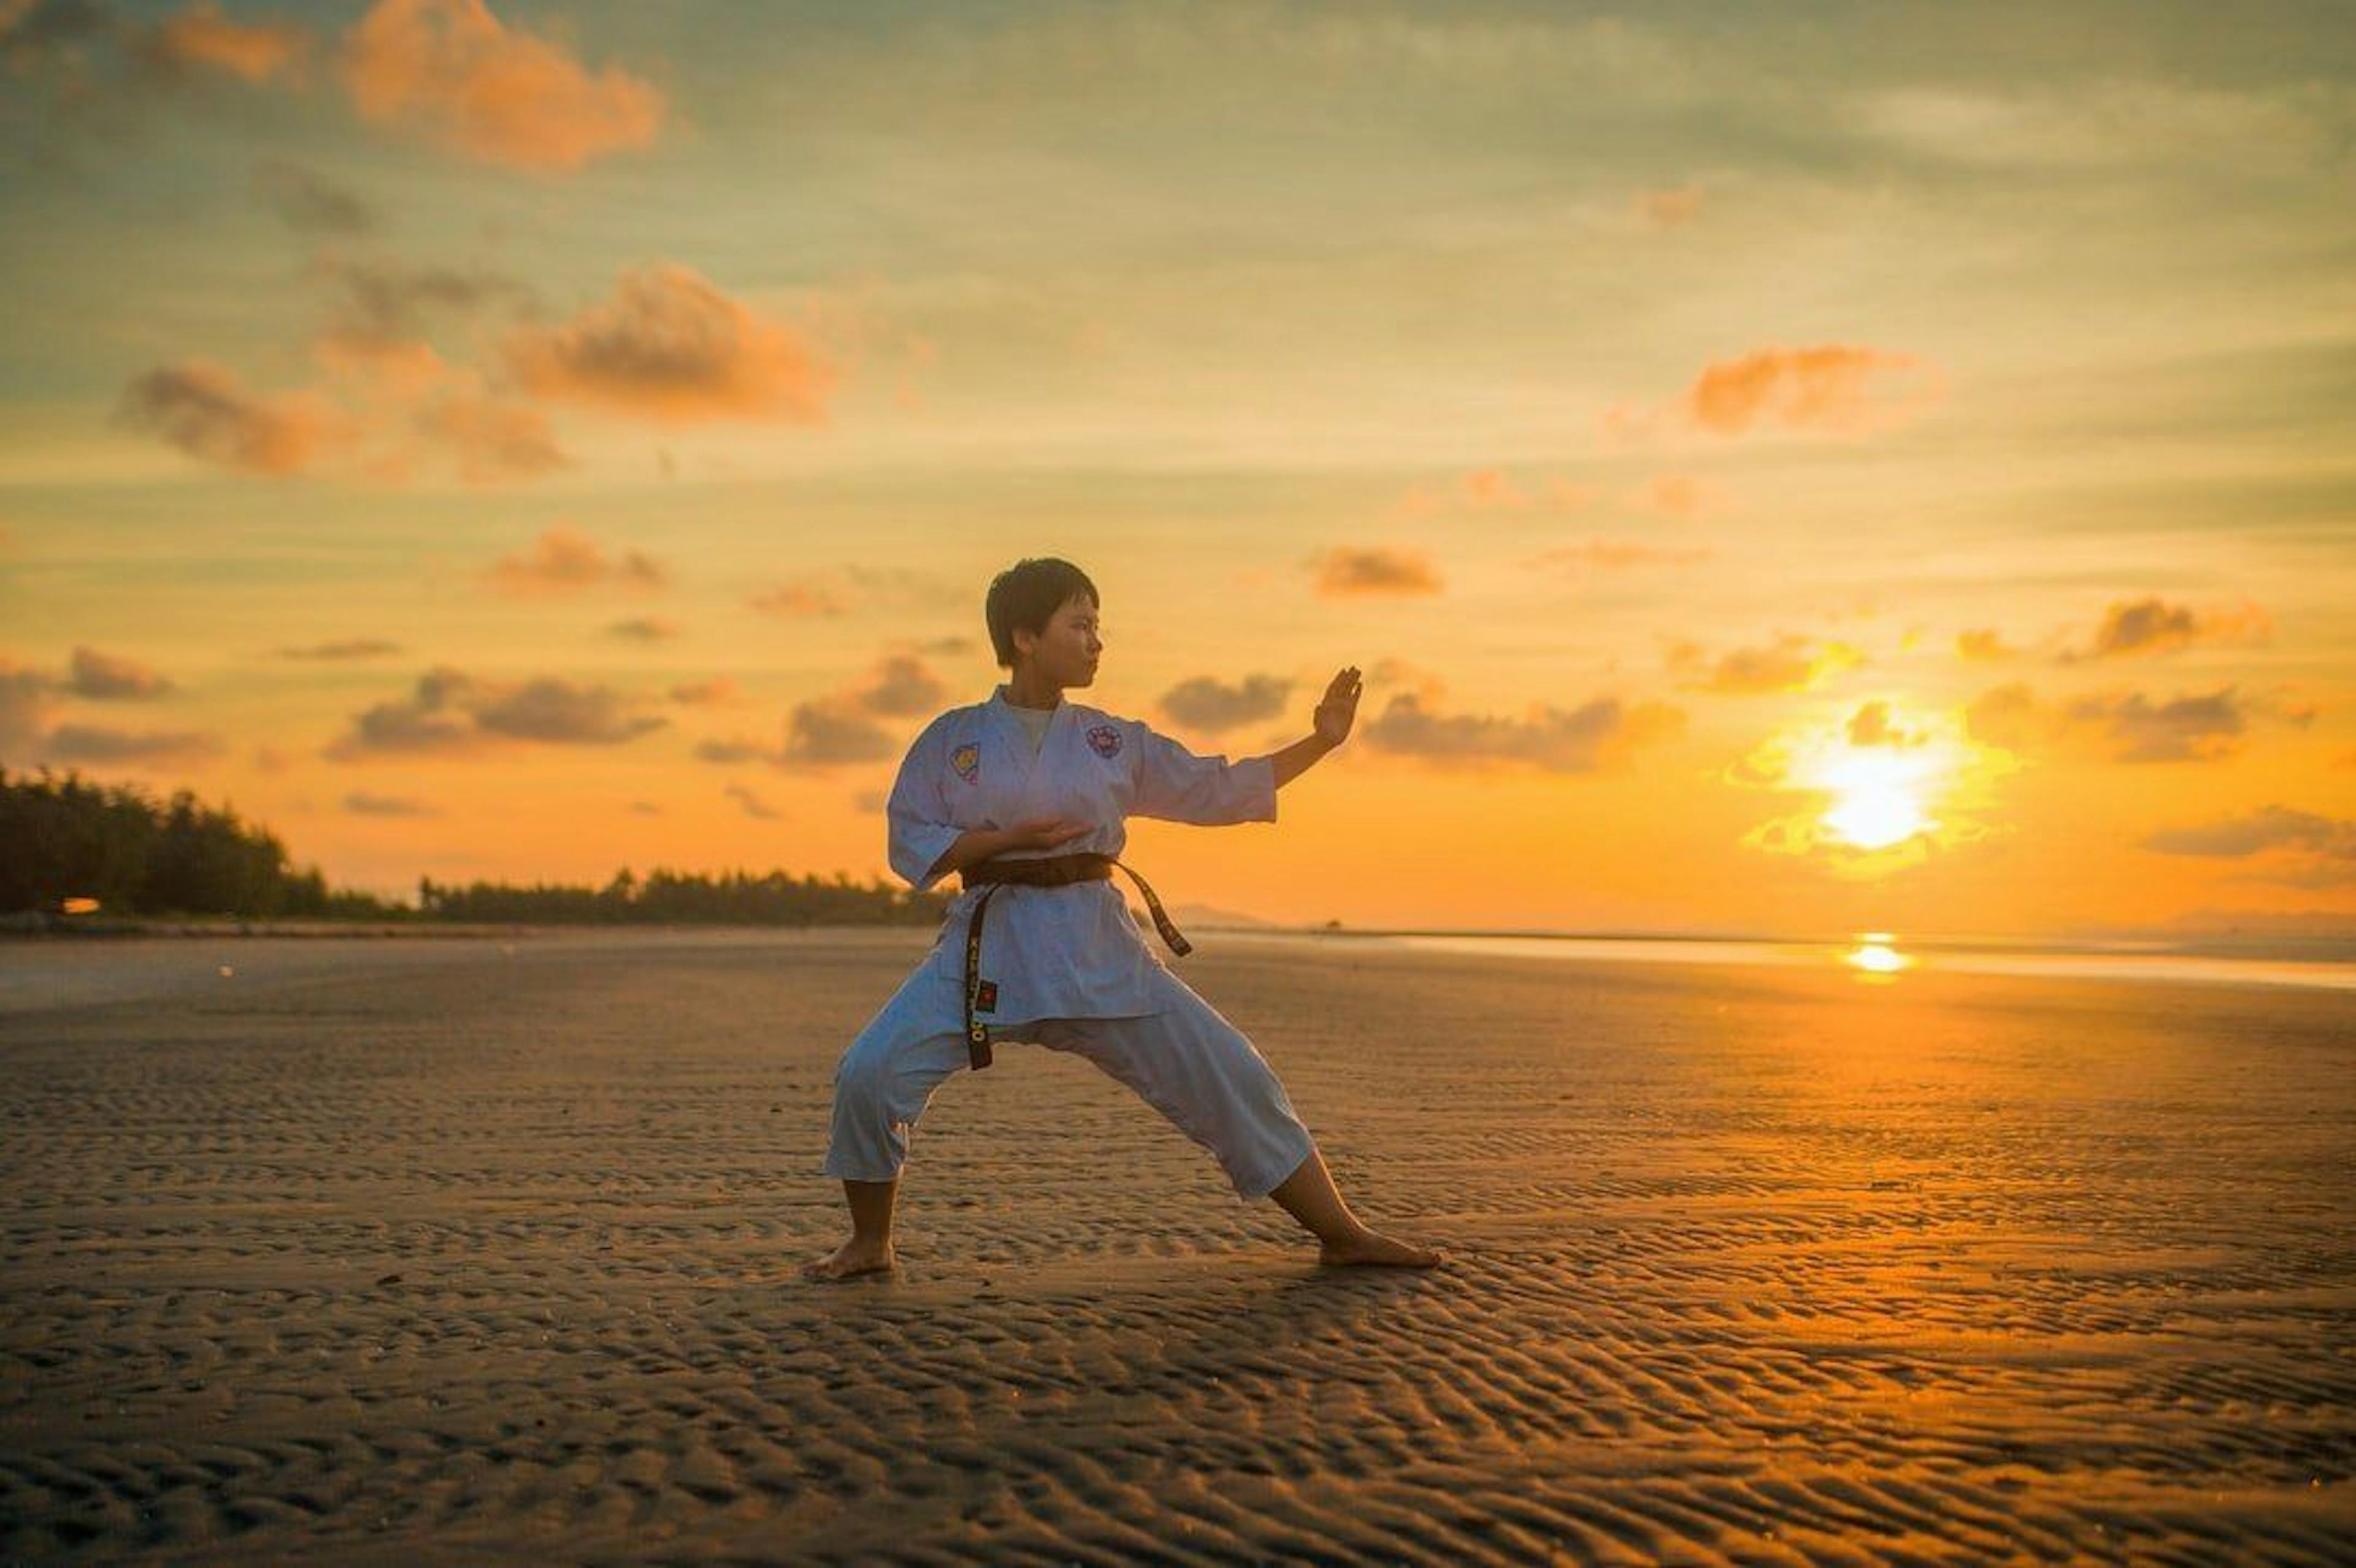 /cybersecurity-lessons-from-an-unexpected-place-martial-arts-1k333344 feature image